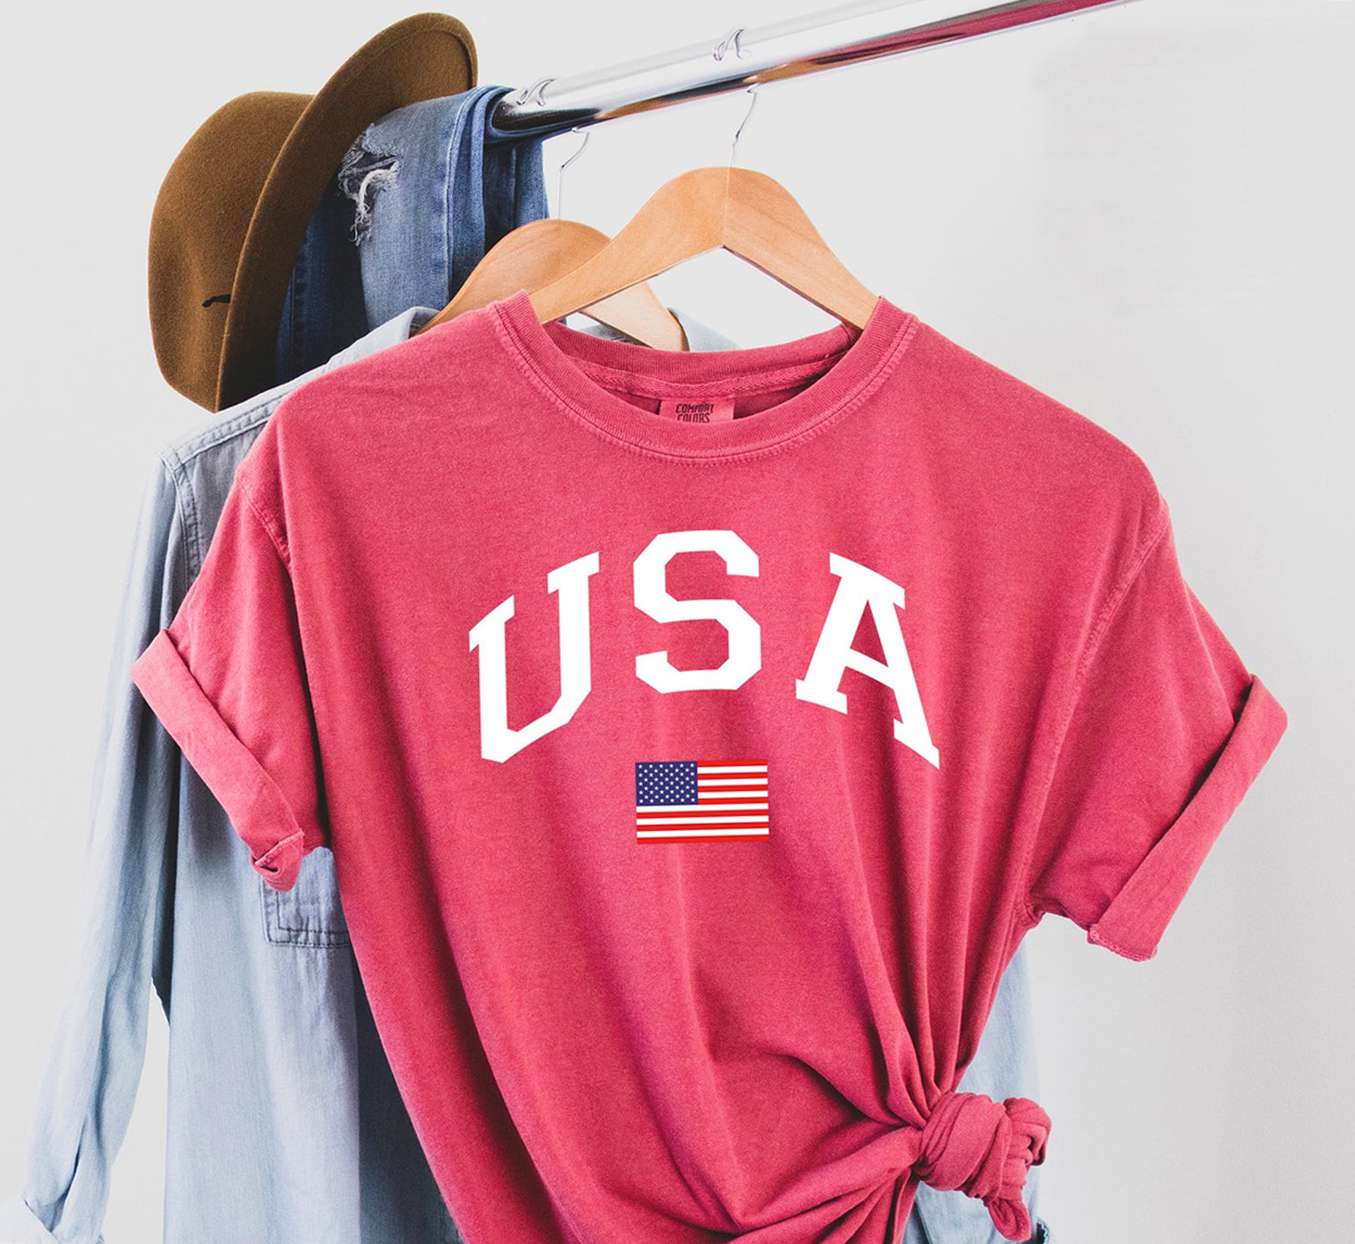 red tshirt with USA and american flag logo